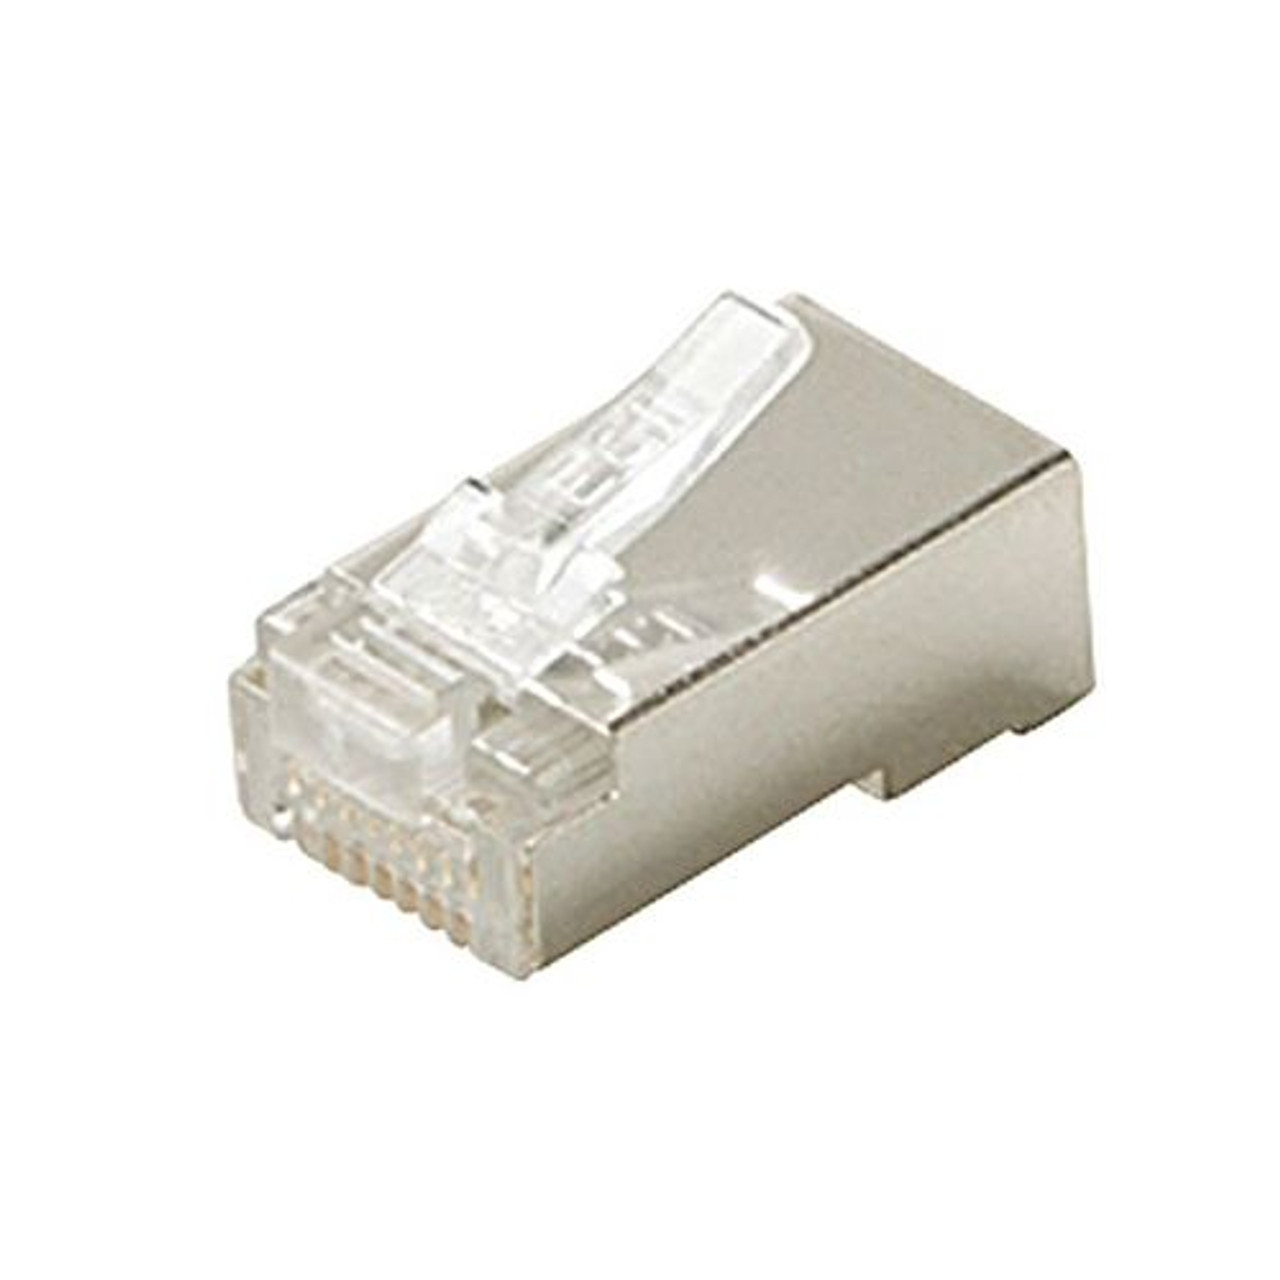 Steren 301-182-50 CAT5e Plug Modular Connector 50 Pack RJ45 Shielded Stranded Wire 8P8C 24-28 AWG UL 8 Pin Male Network Data Telephone Line